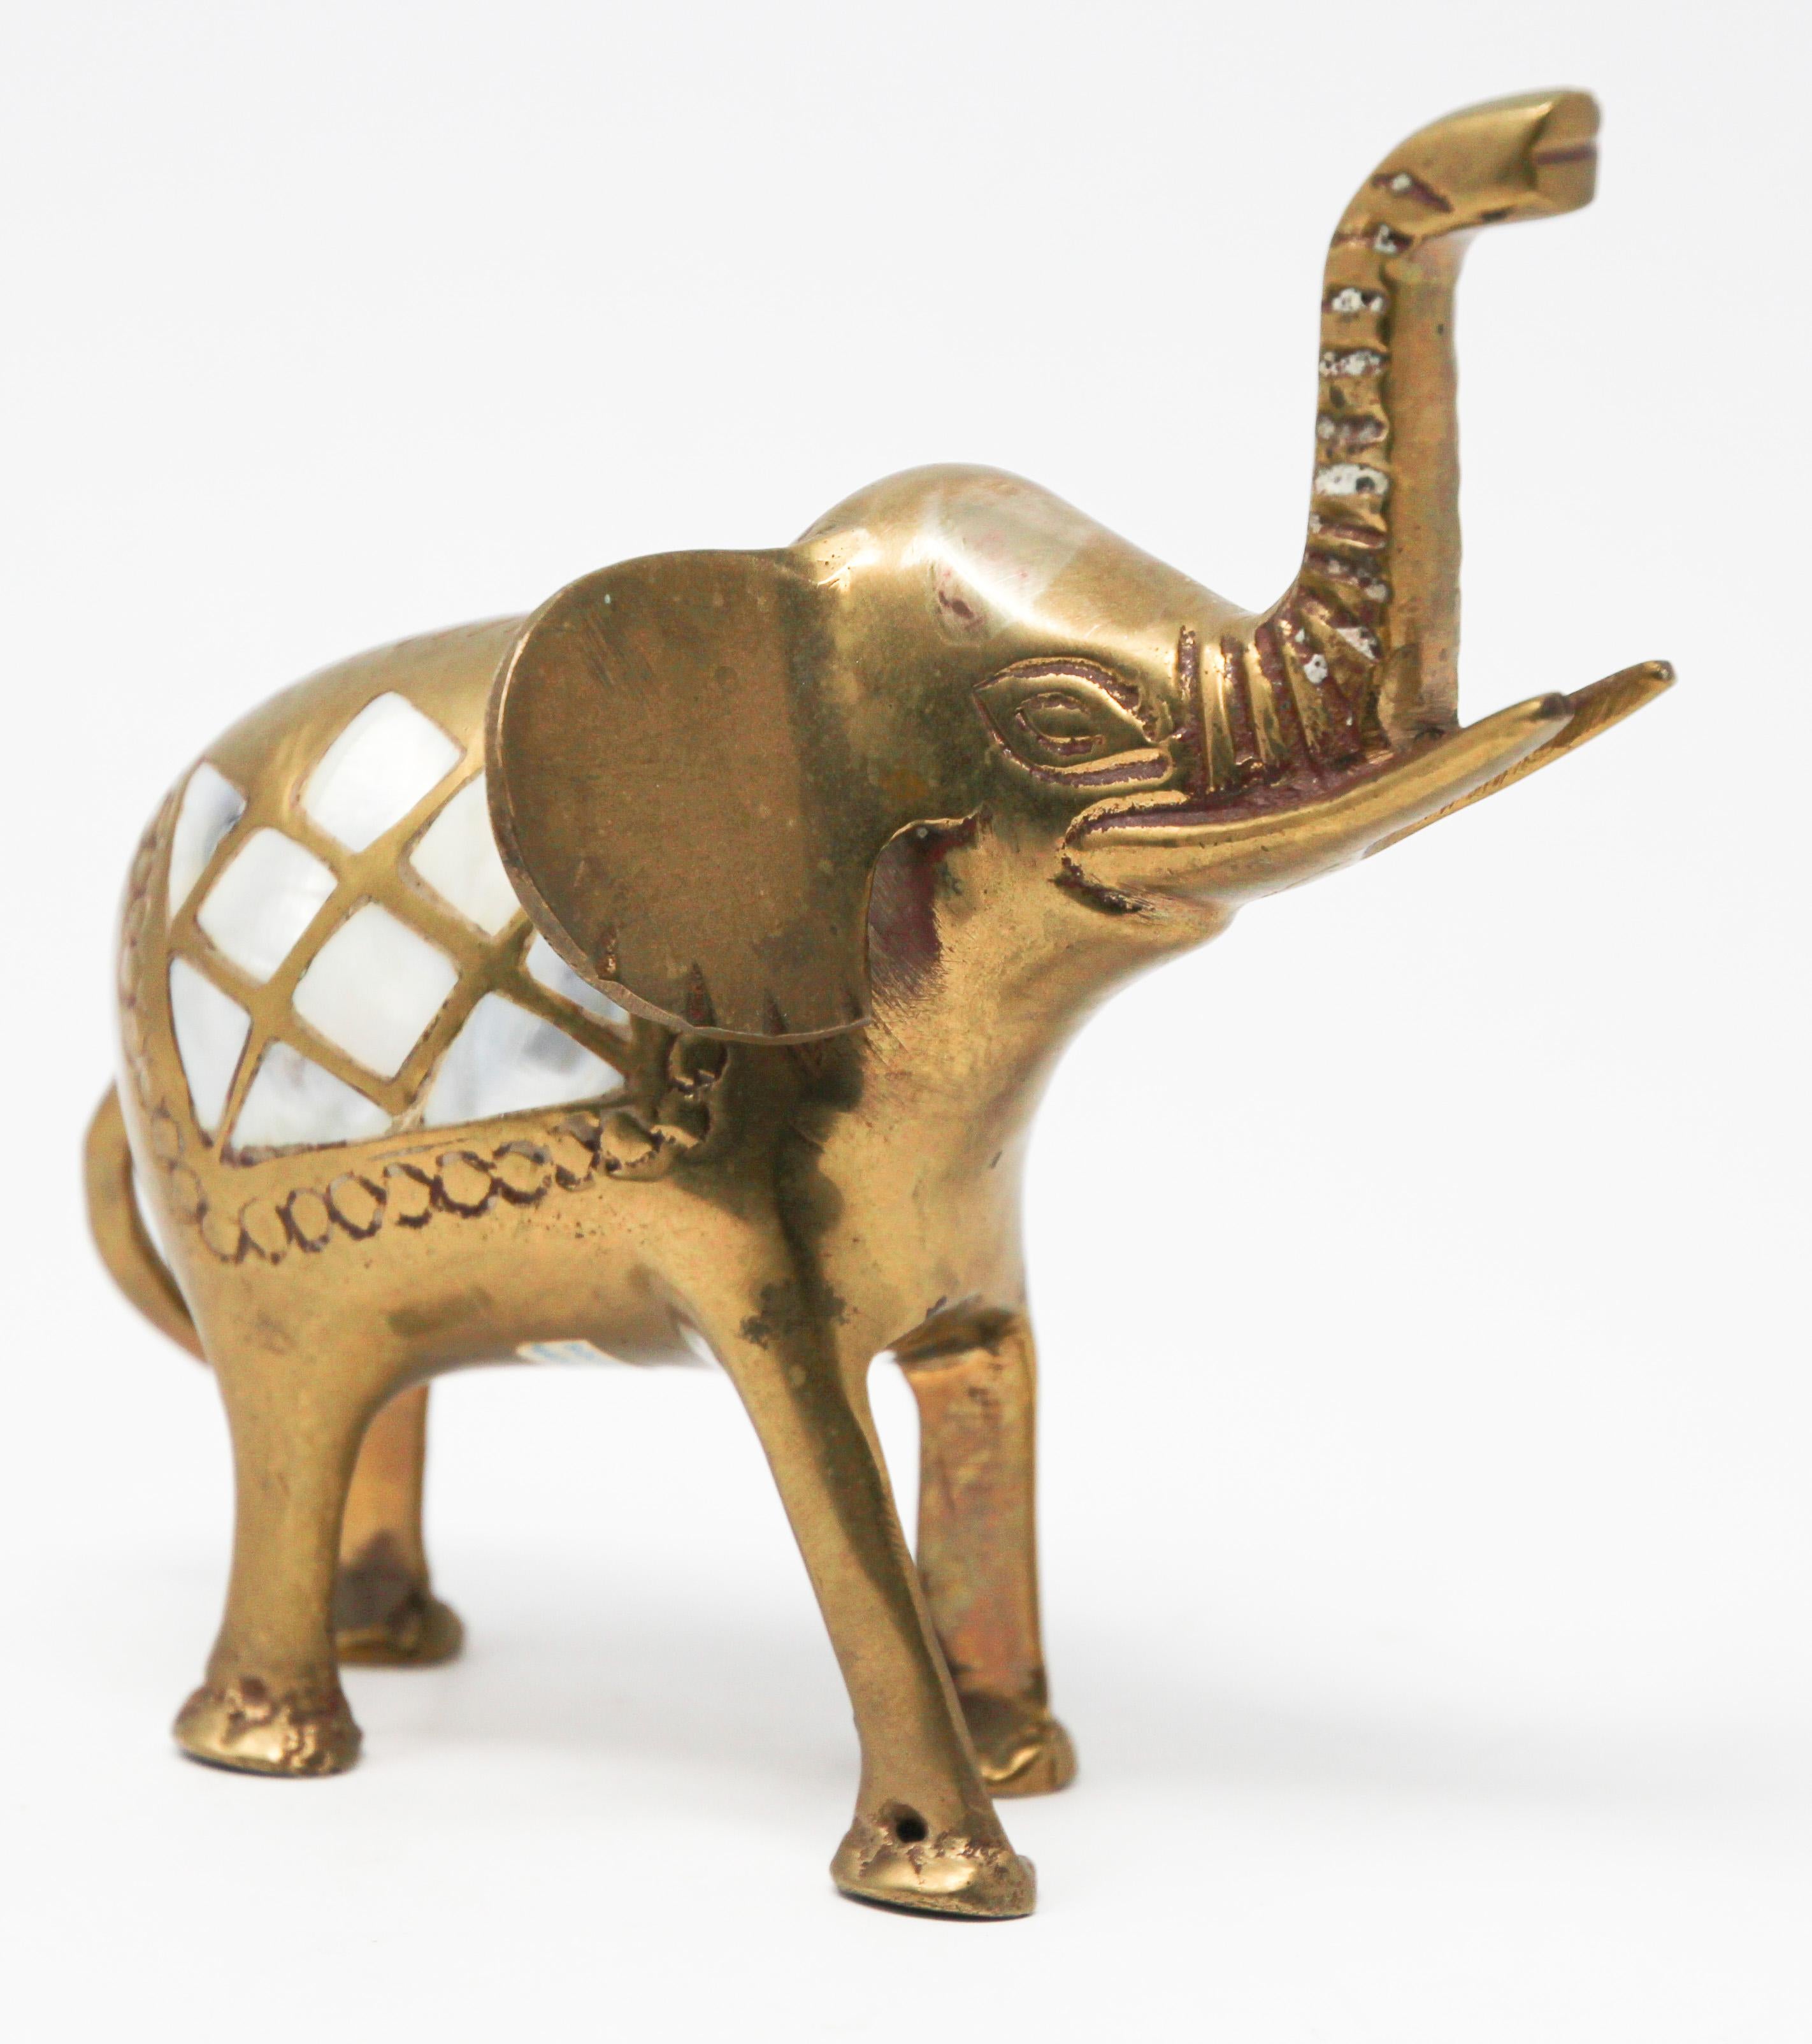 Vintage cast solid polished brass elephant sculpture paper weight.
The elephant has mother of pearl inlaid and his trunk is up for good luck.
Nice decorative shelf or desk accessories
Dimensions: 6.5